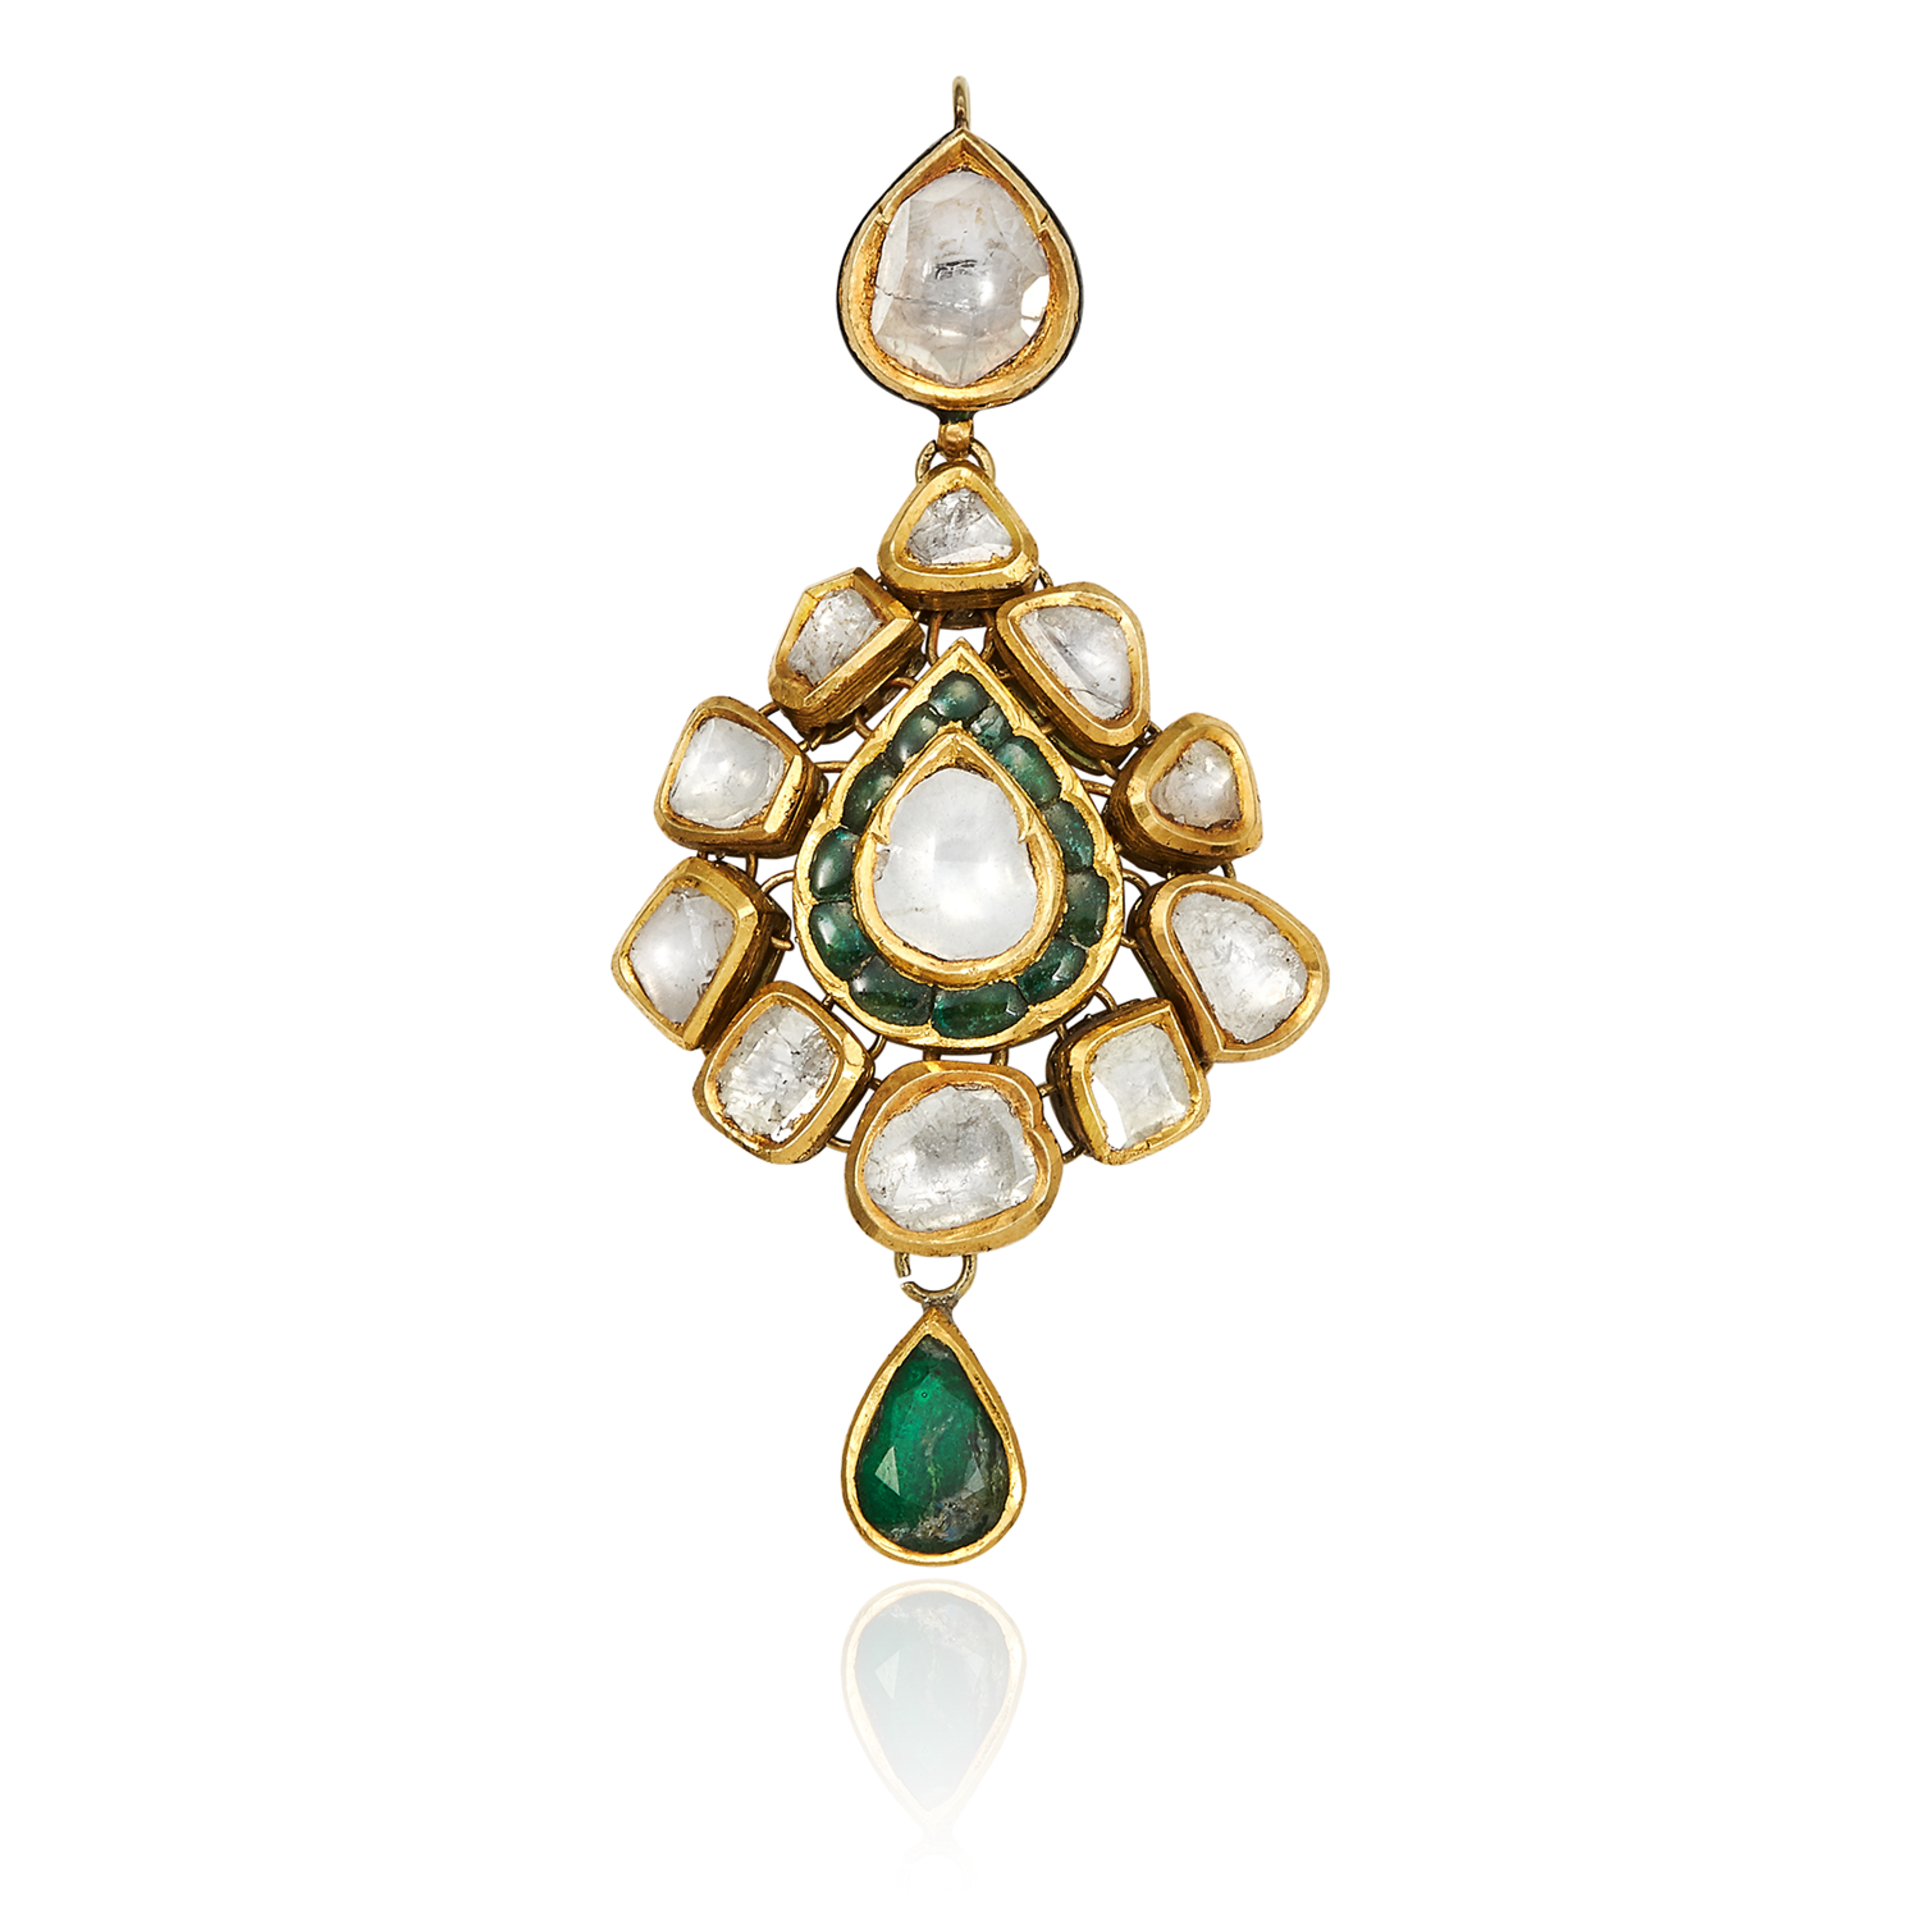 A DIAMOND, EMERALD AND ENAMEL PENDANT, INDIAN in high carat yellow gold, the central diamond